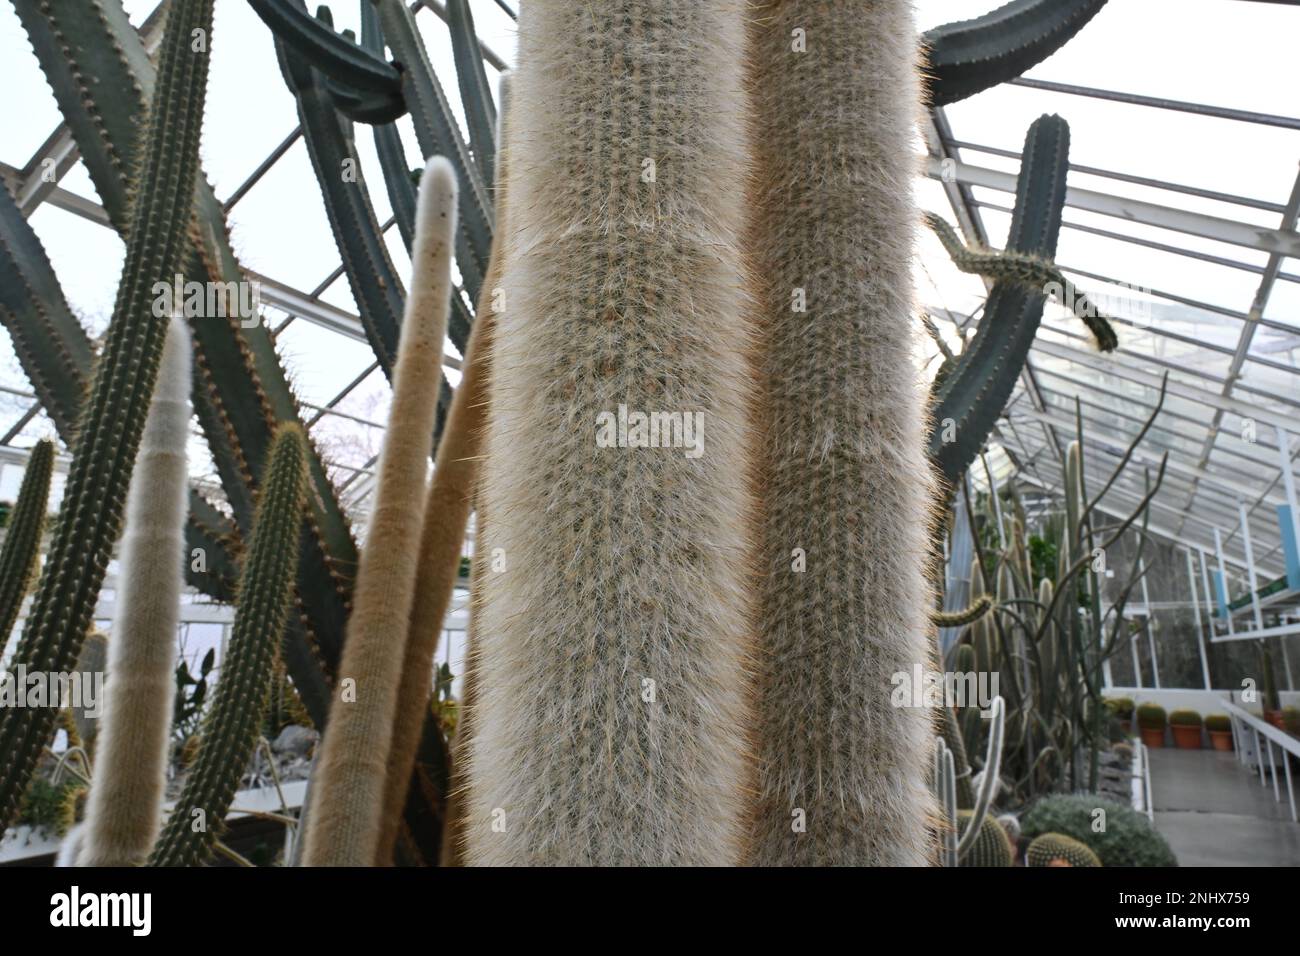 Two stems of silver torch or woolly torch cactus, in Latin called cleistocactus strausii. Cutout from a greenhouse full of cacti and succulent plants Stock Photo